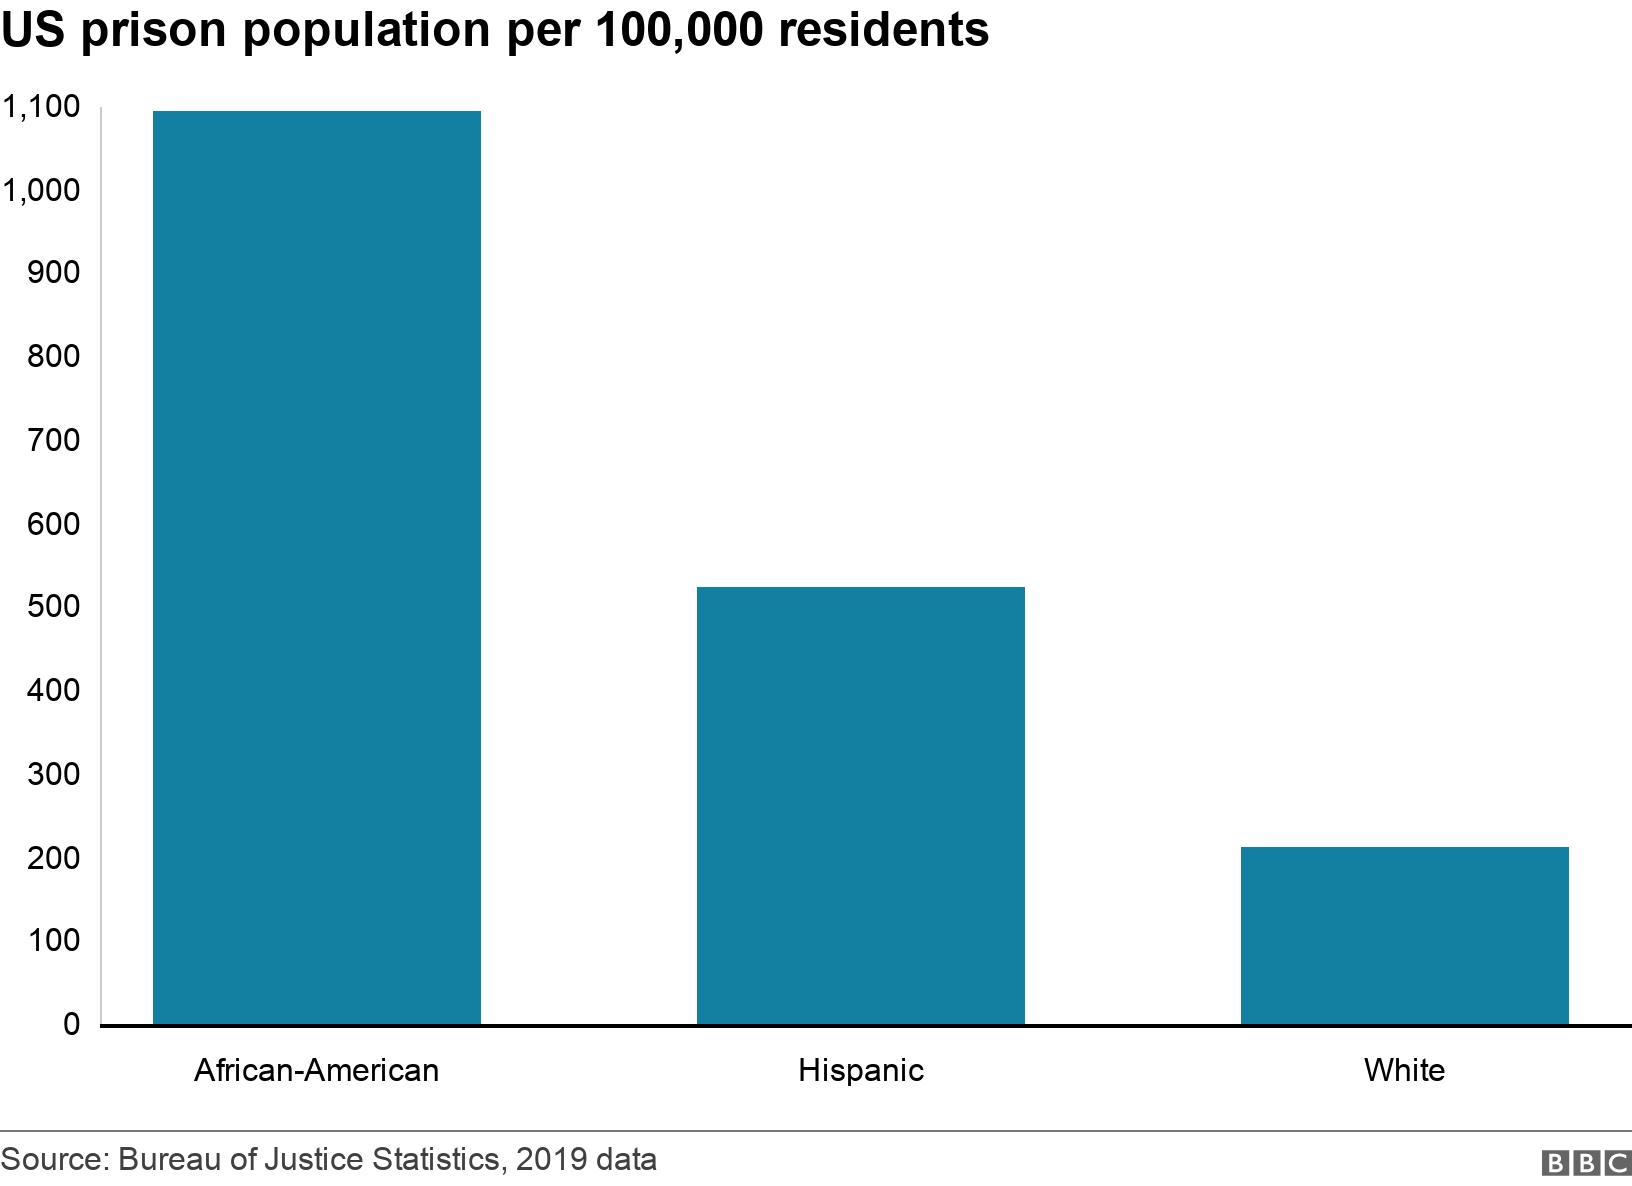 Chart showing prison population per 100,000 residents by race in 2019.